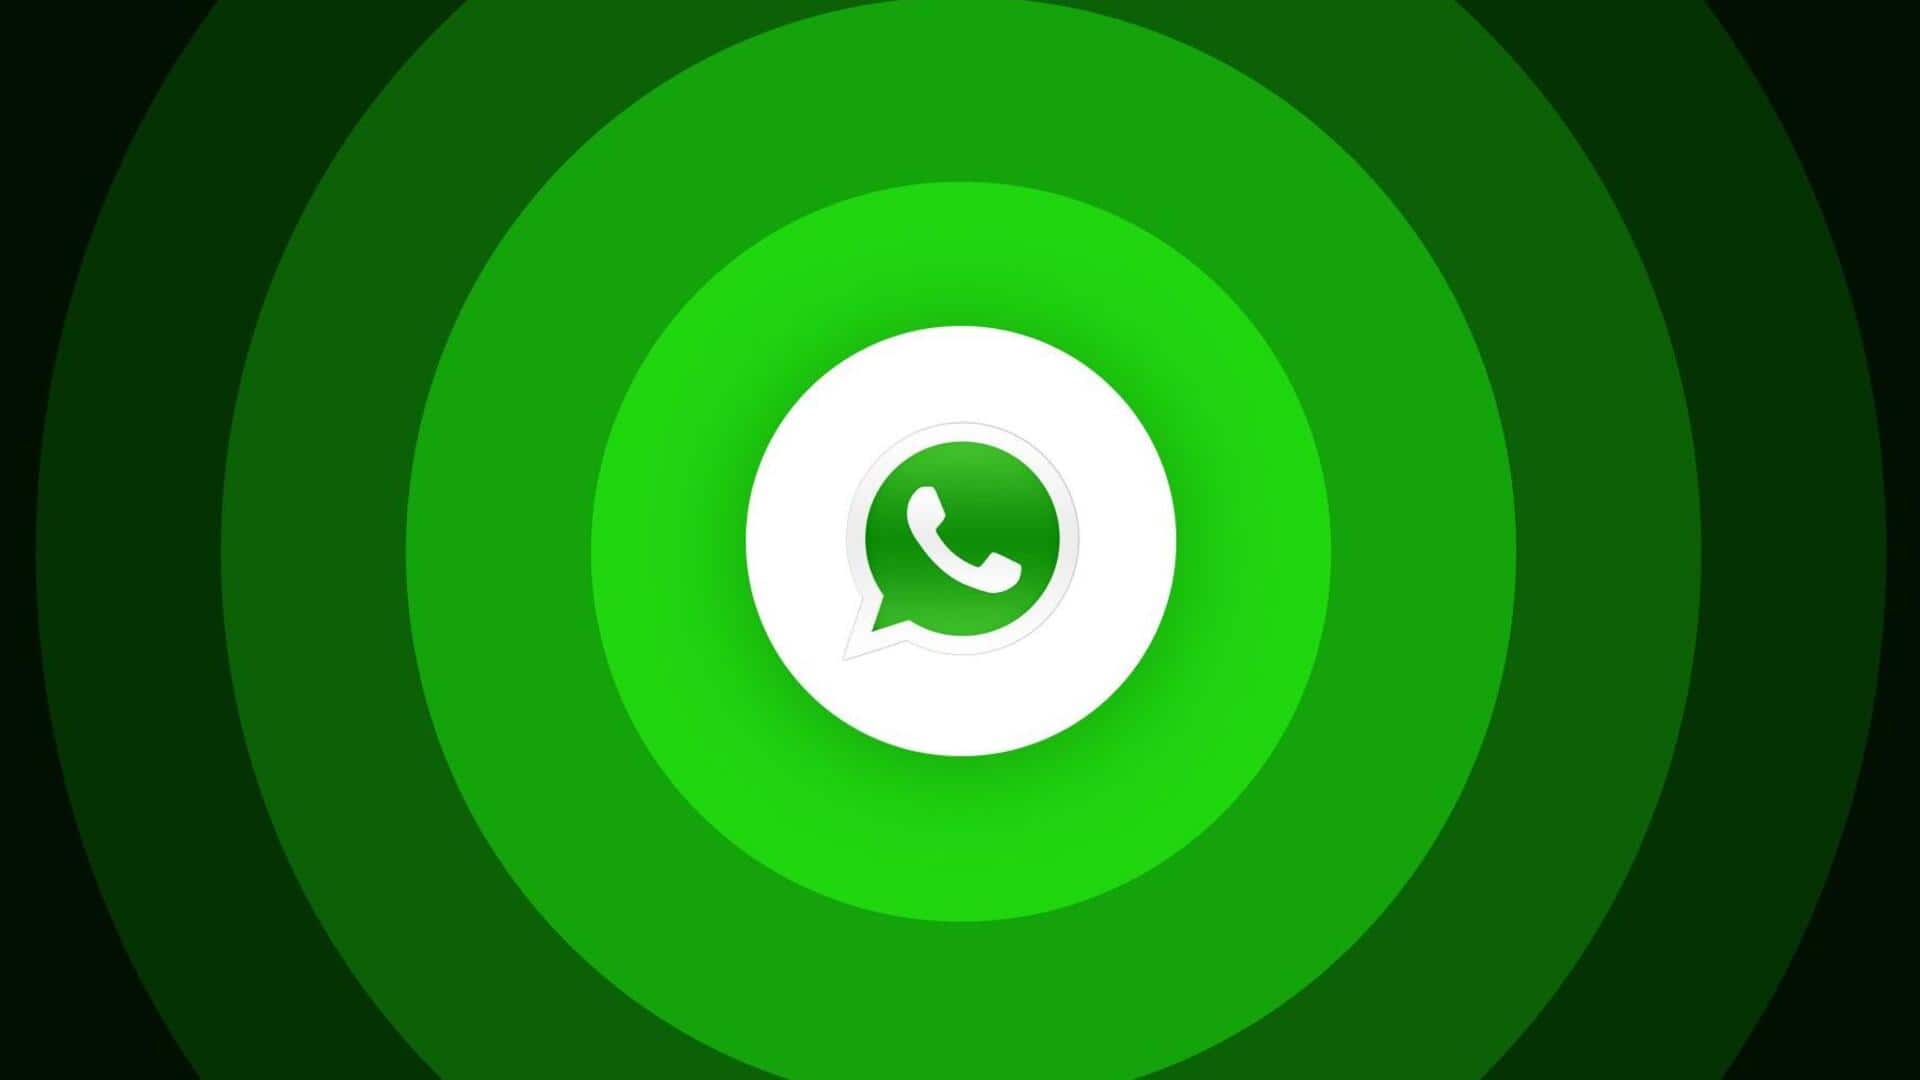 How to invite new admins to WhatsApp channels on iOS